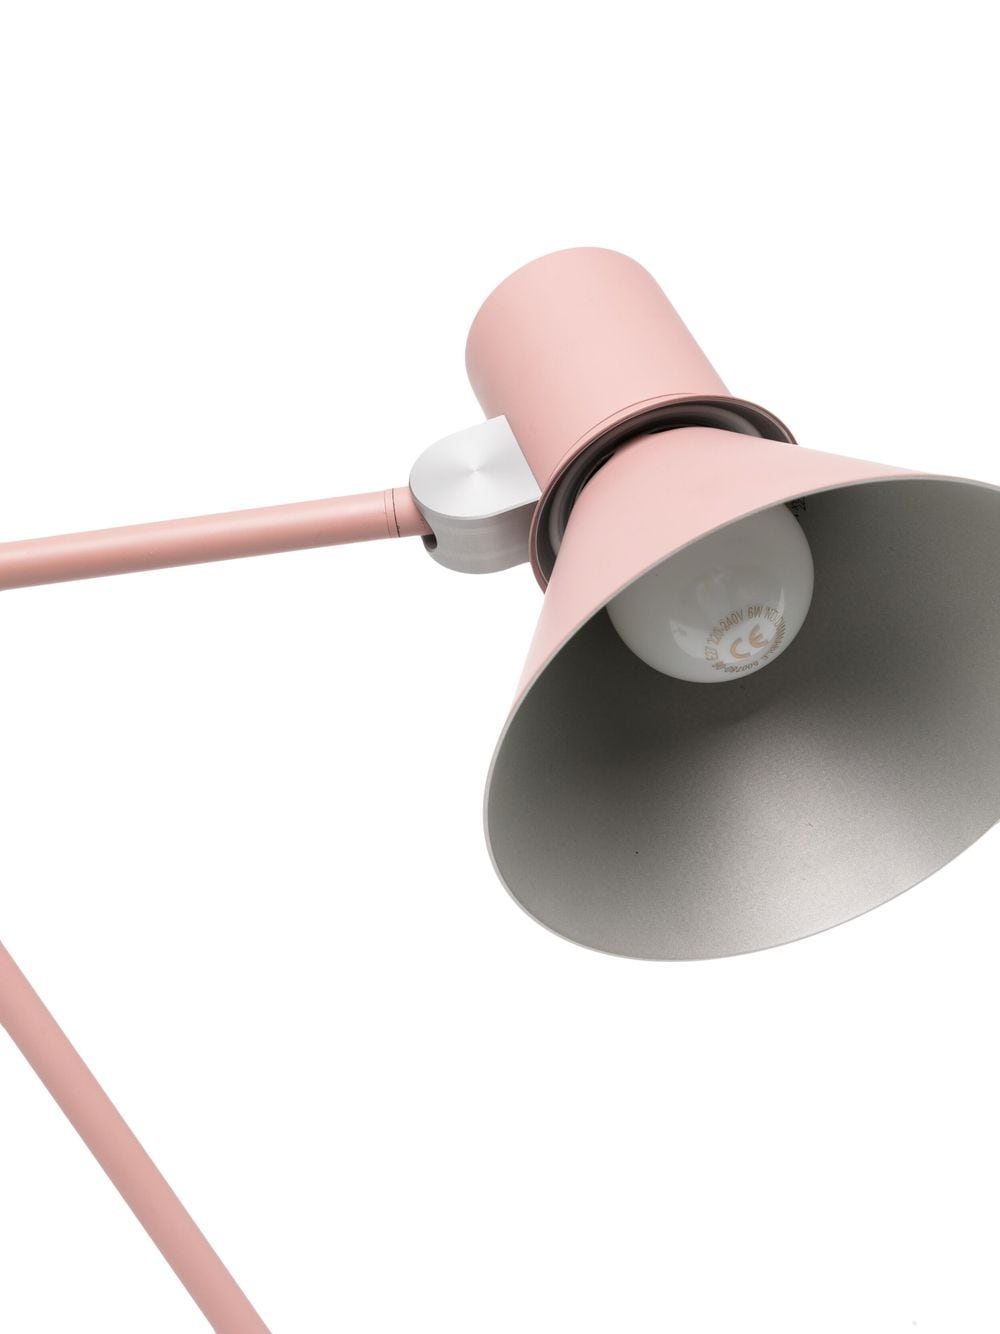 anglepoise type 80 desk lamp - pink